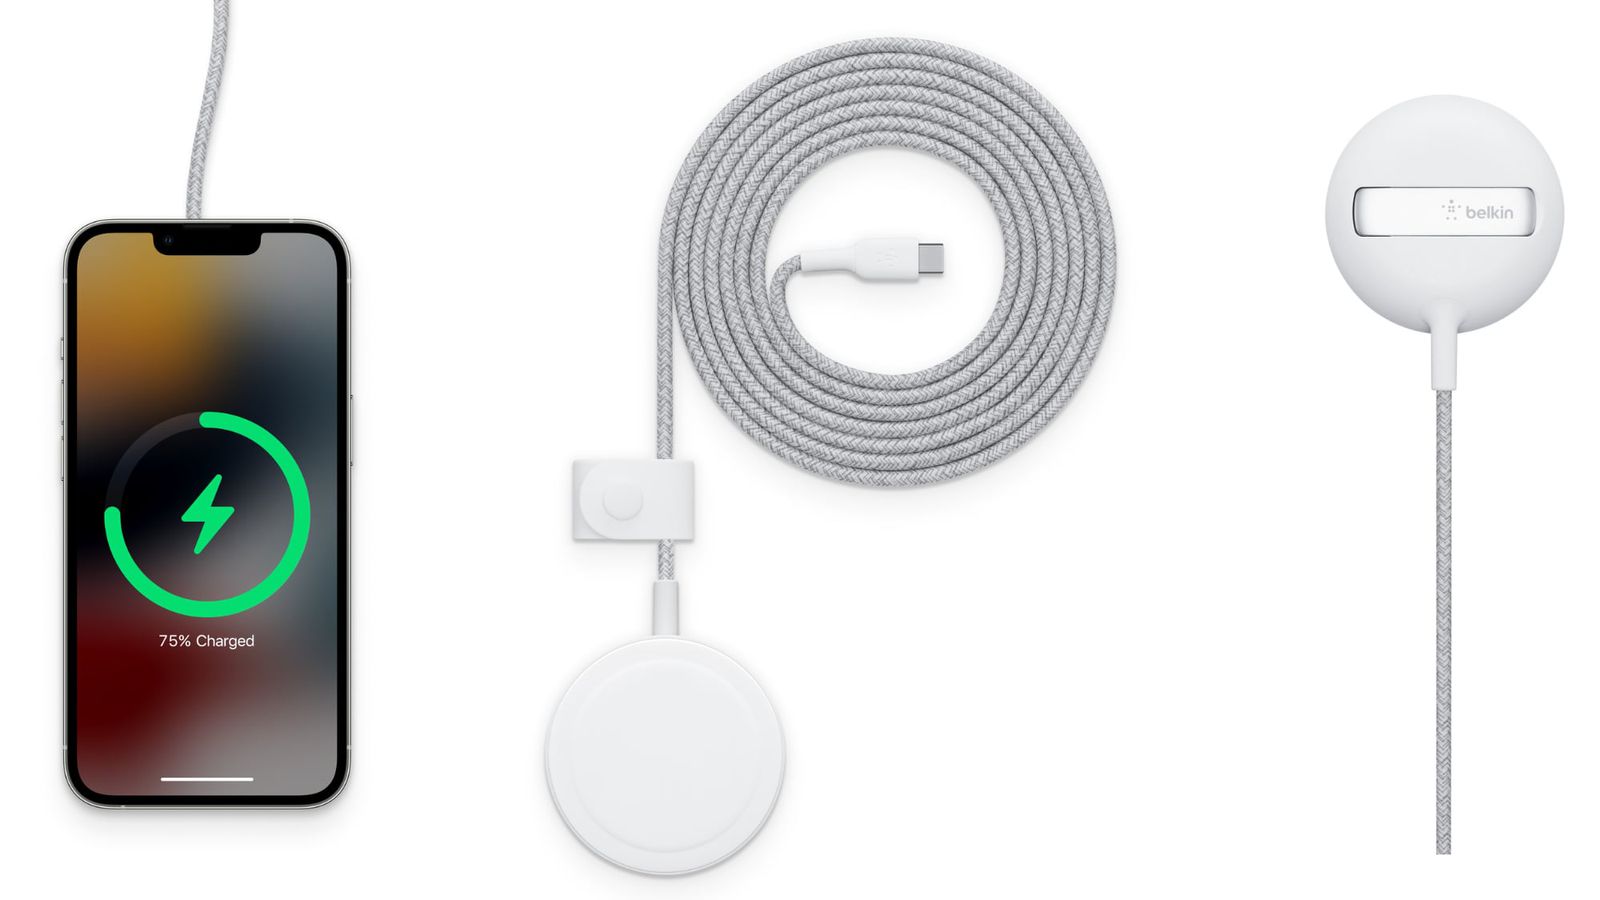 Belkin Launches New 2-in-1 MagSafe Charging Pad - MacRumors